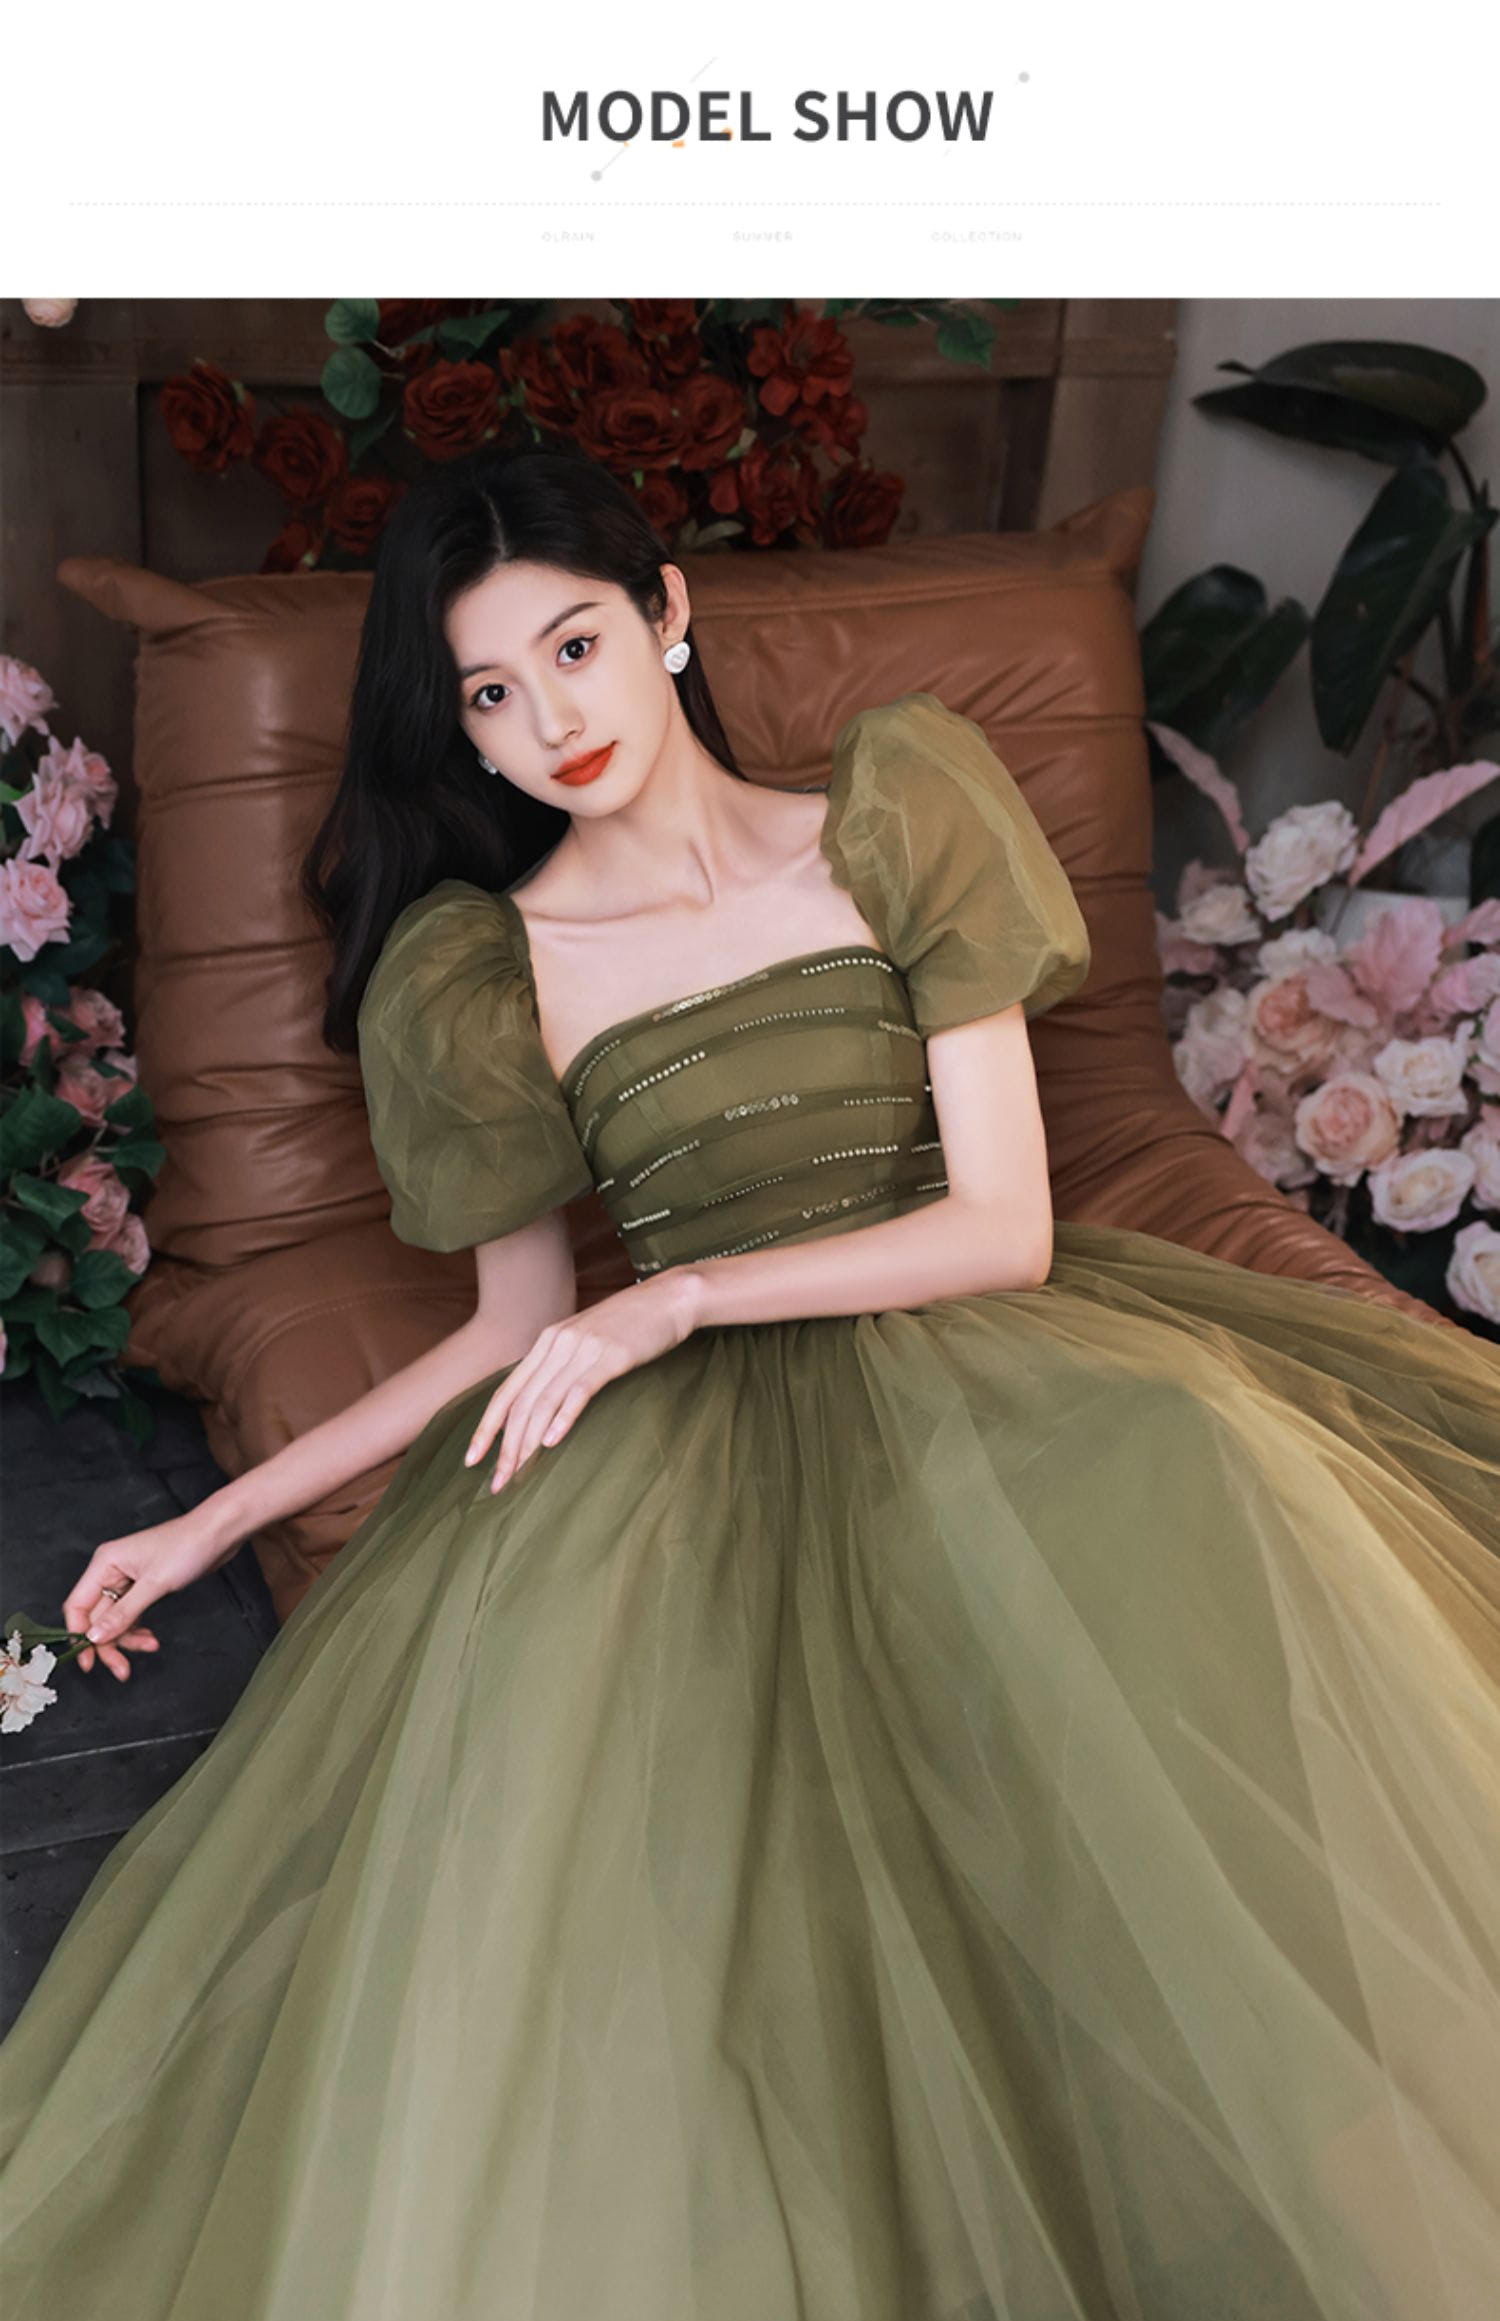 A-Line-Green-Tulle-Formal-Evening-Maxi-Dress-Long-Ball-Gown